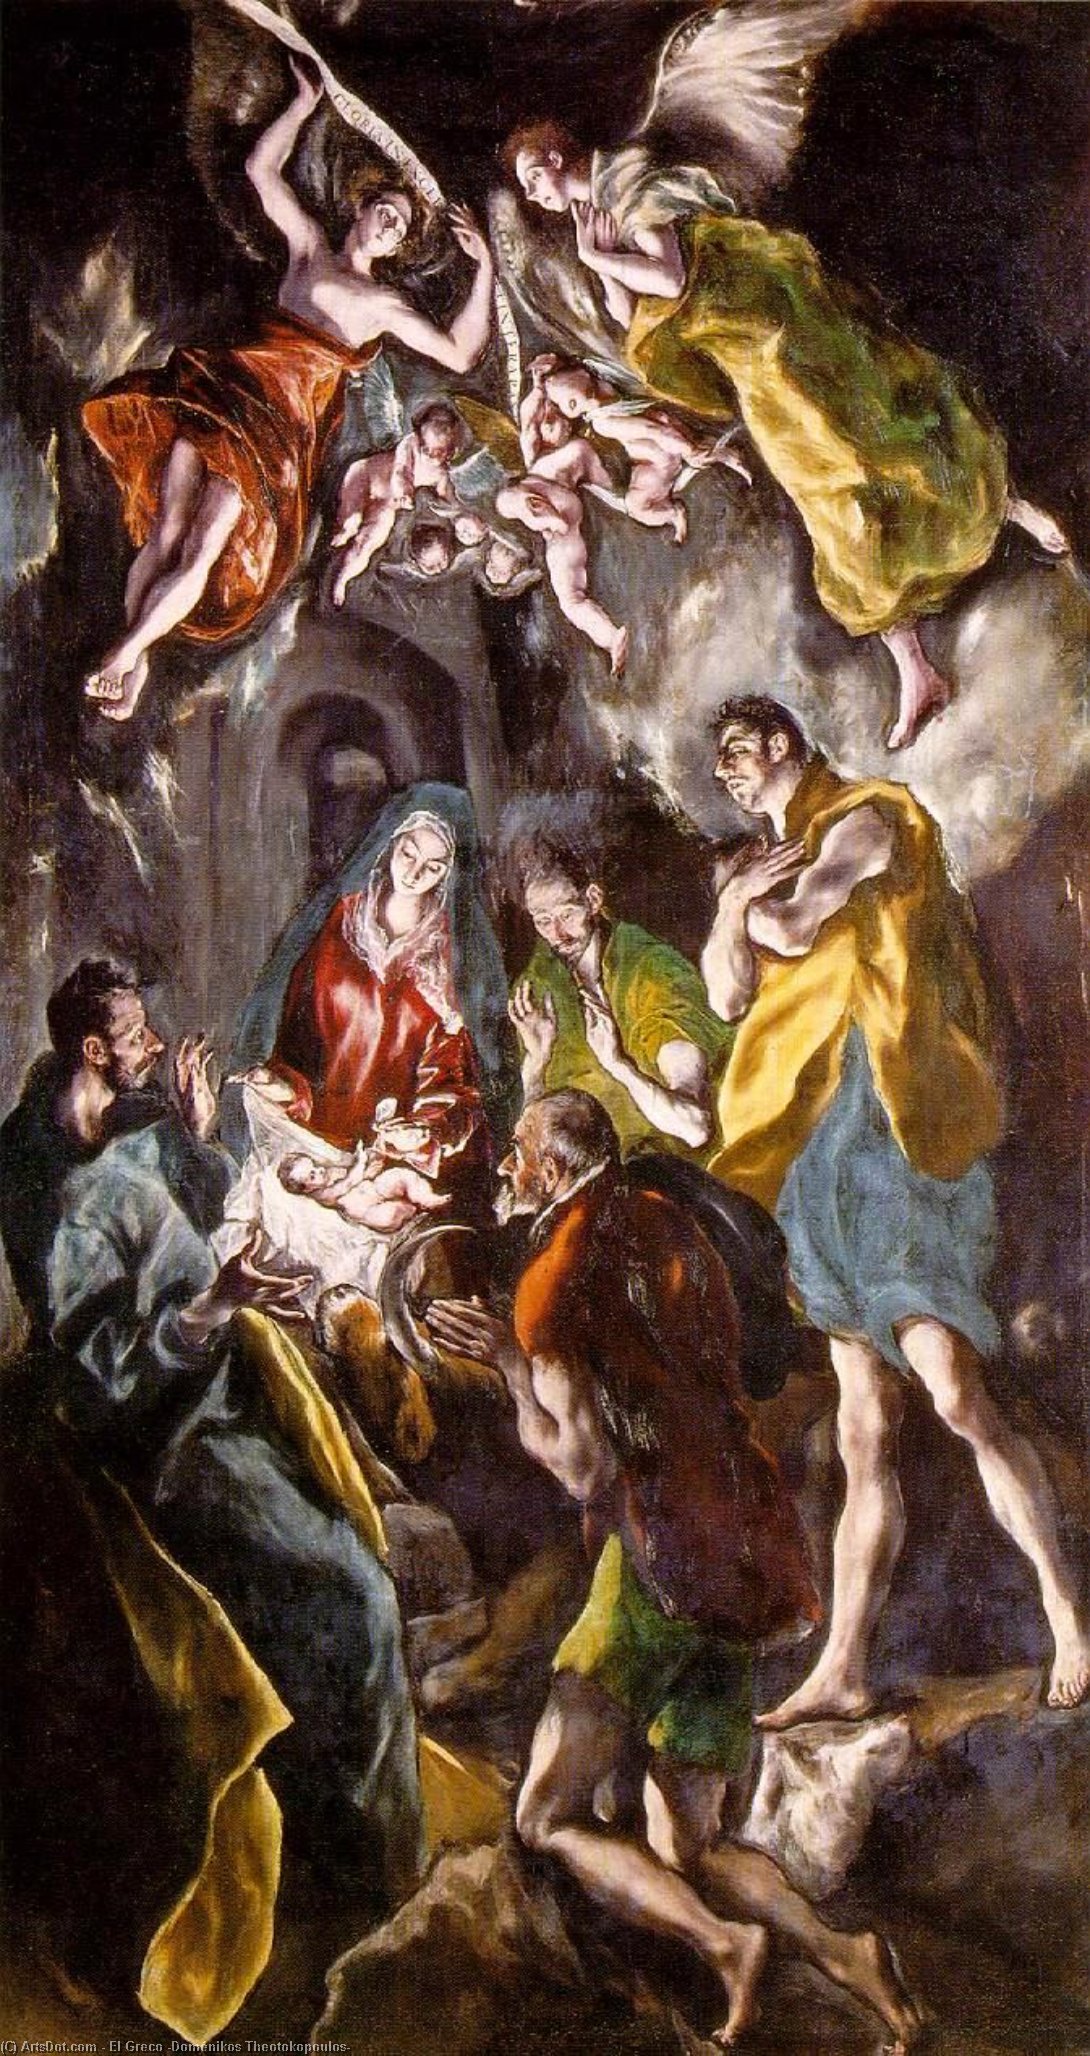 WikiOO.org - 백과 사전 - 회화, 삽화 El Greco (Doménikos Theotokopoulos) - The Adoration of the Shepherds